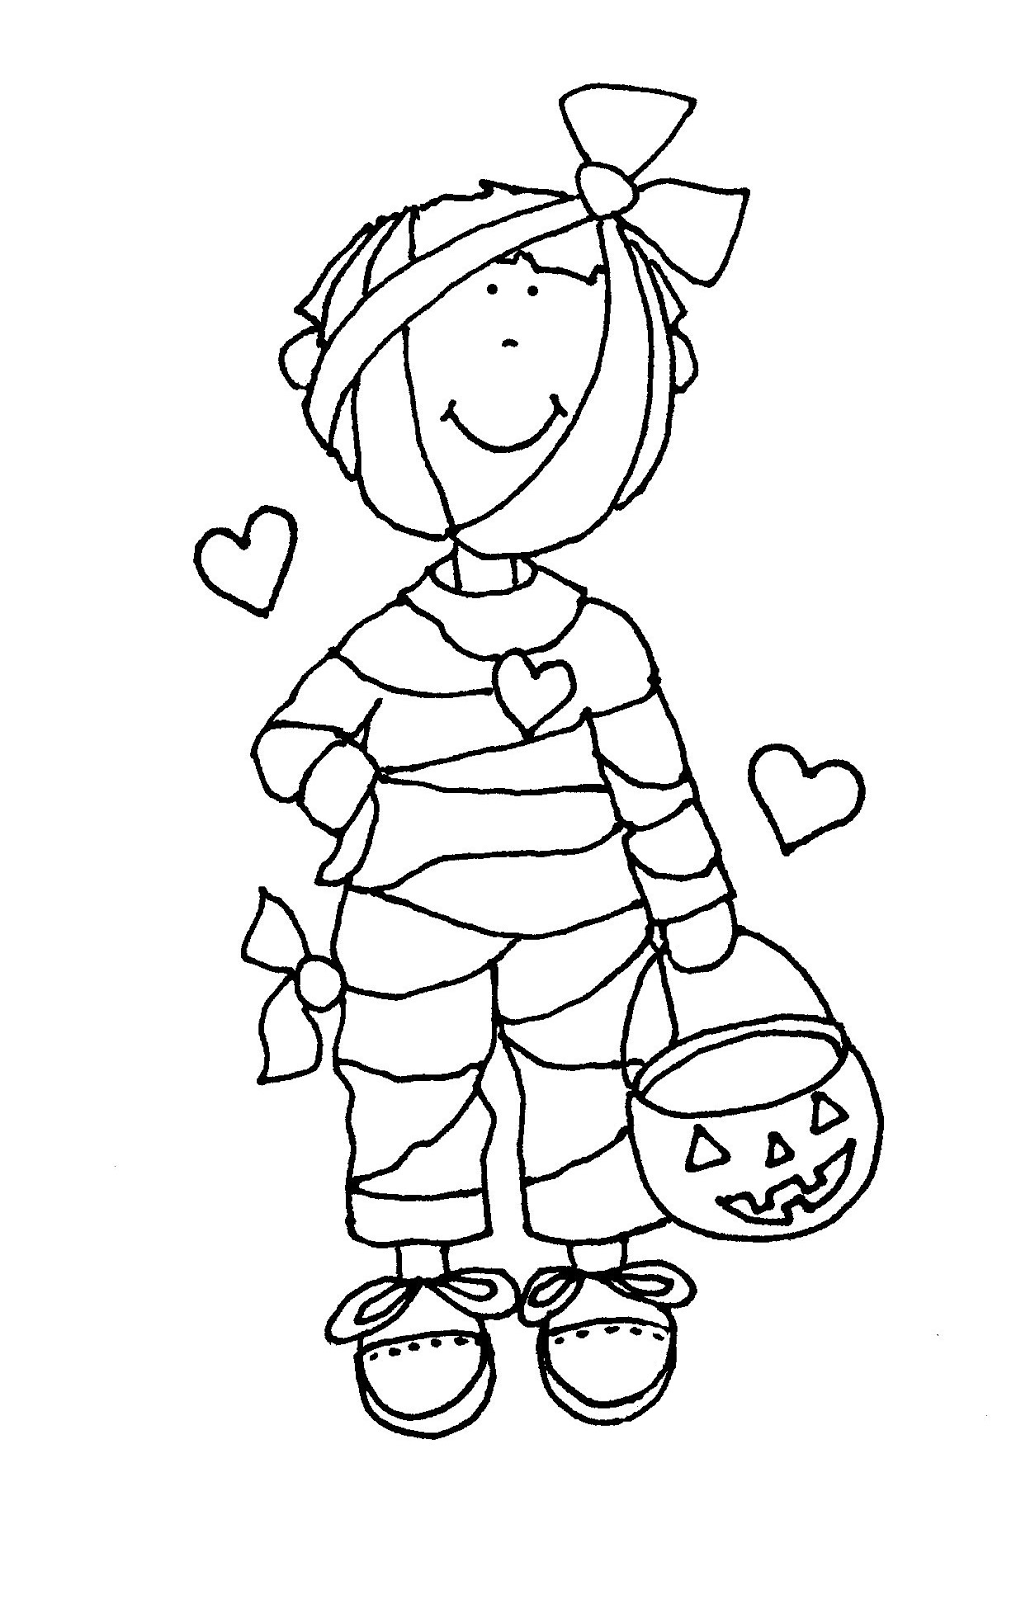 Images For > Cute Mummy Drawing